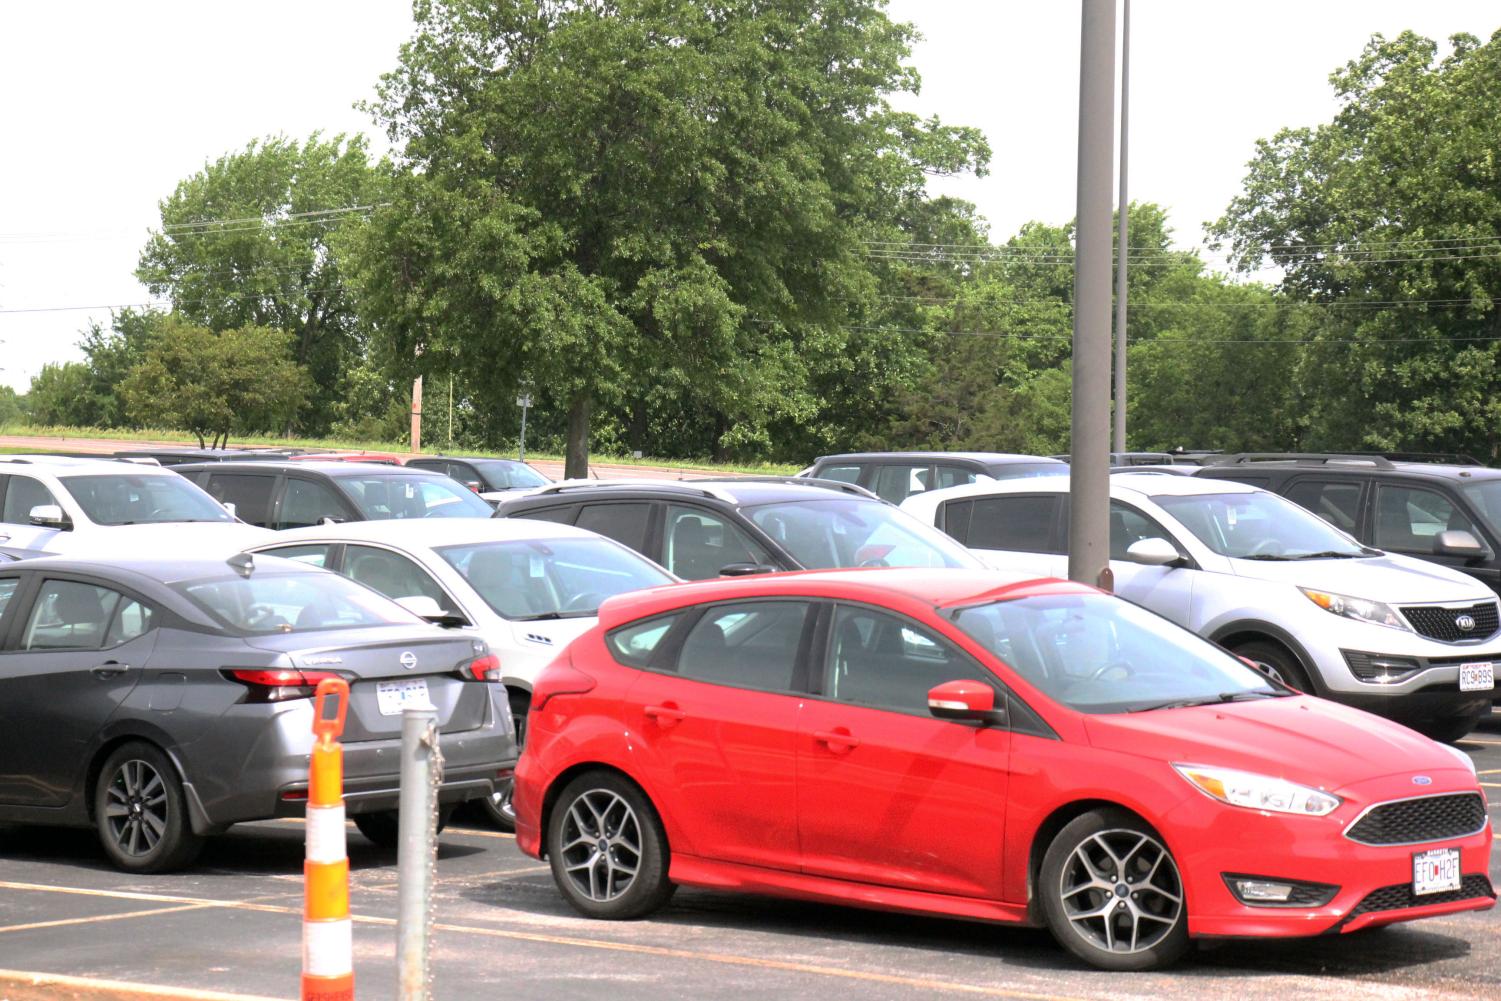 The west parking lot is full of cars during the school day. Starting on Aug. 1, seniors will have the chance to purchase their parking spot, and can choose it on May 16.